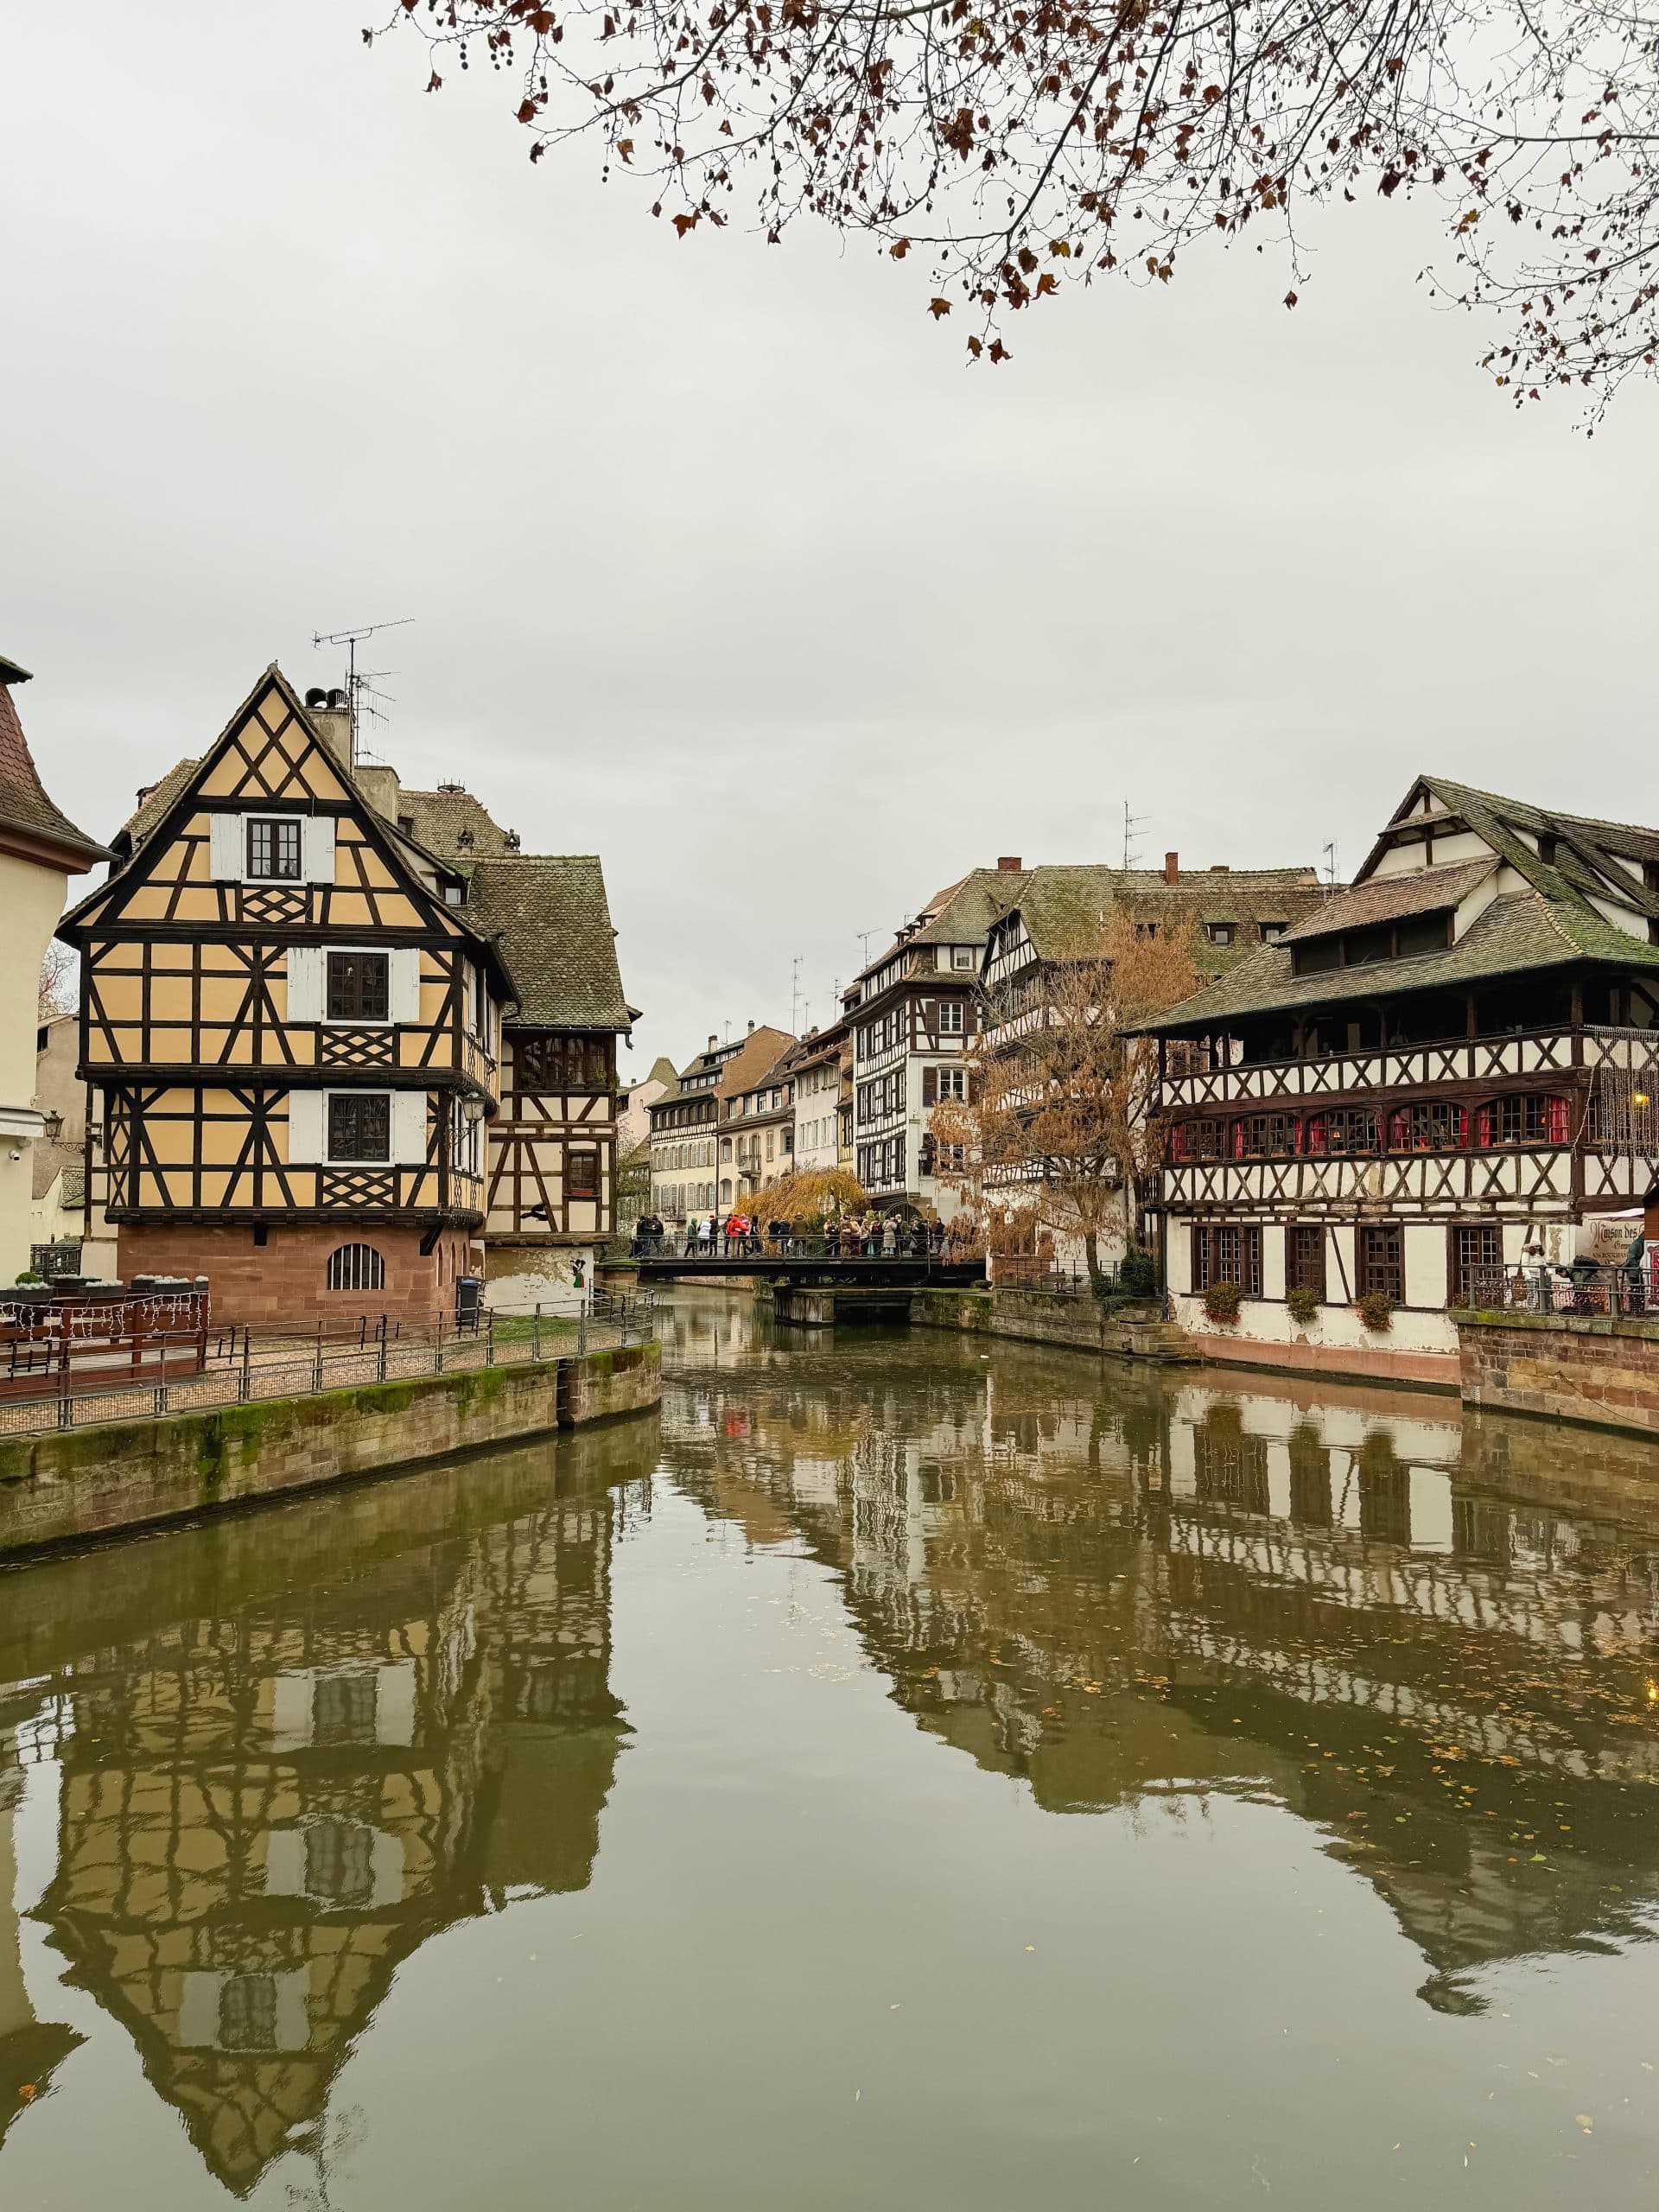 Things to do in Strasbourg France - Petite France river